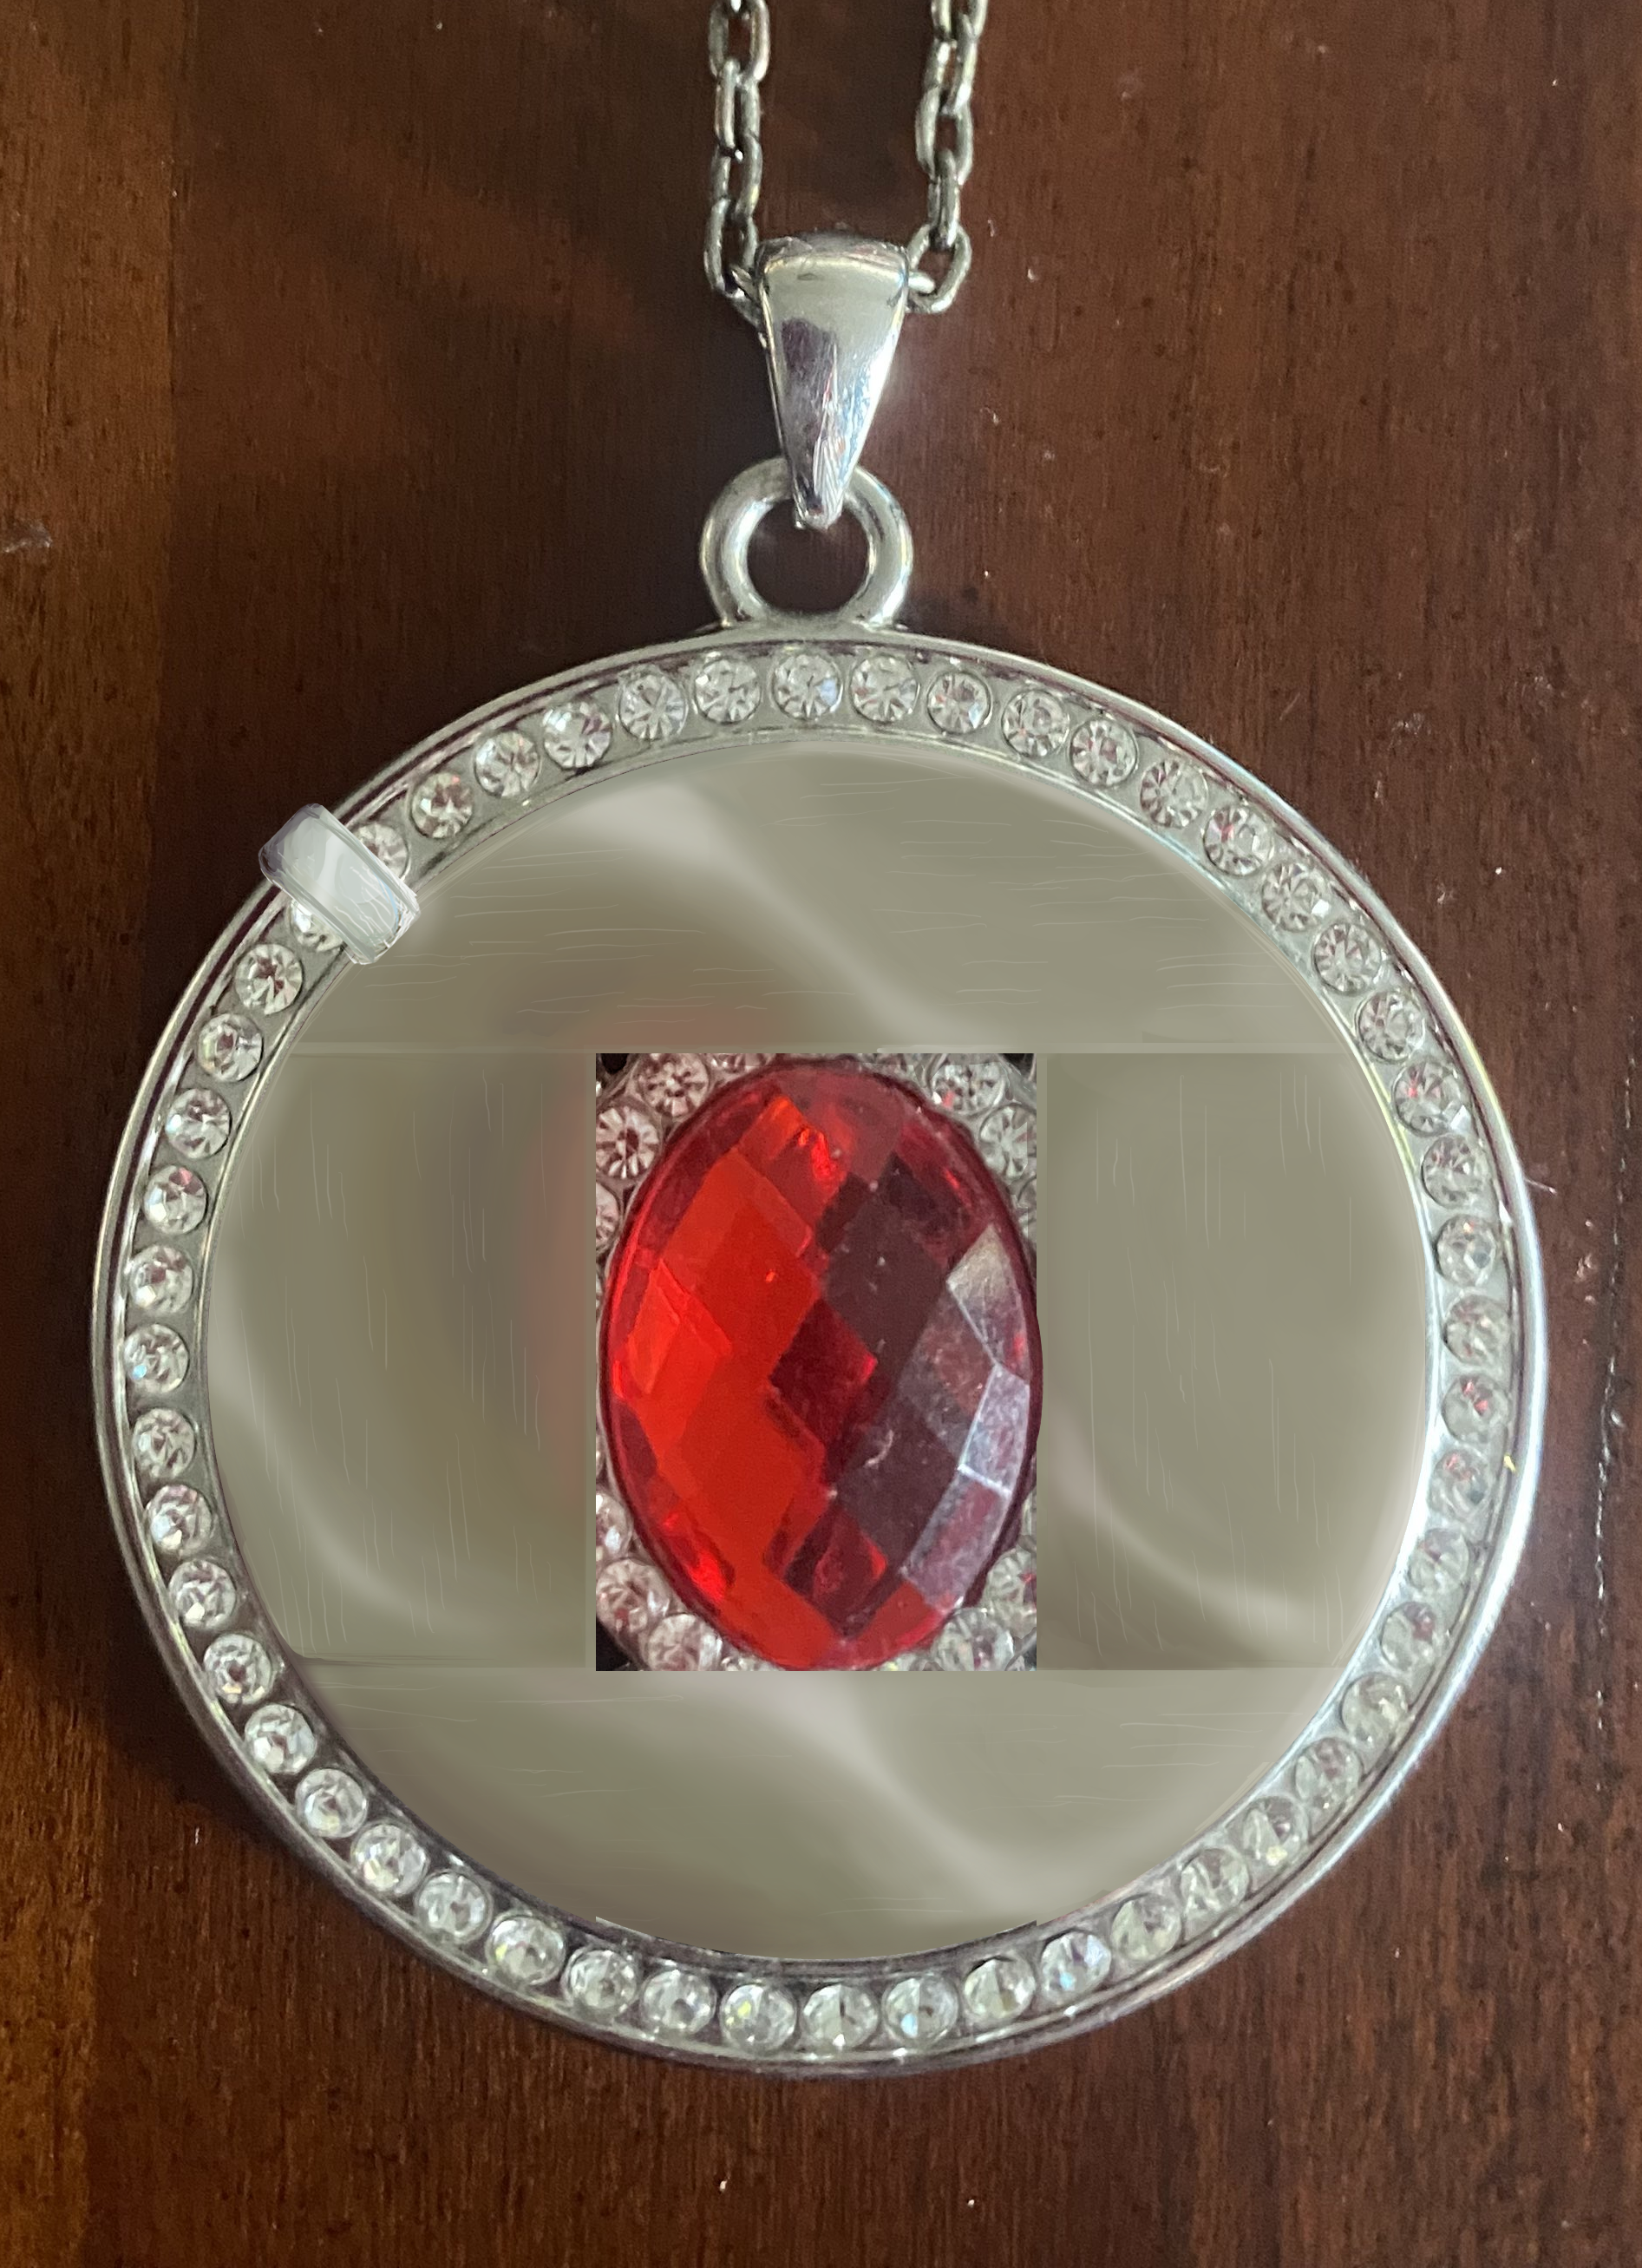 An amulet with metal plates on its surface, a central red gem, and a ring connected to its circumference.